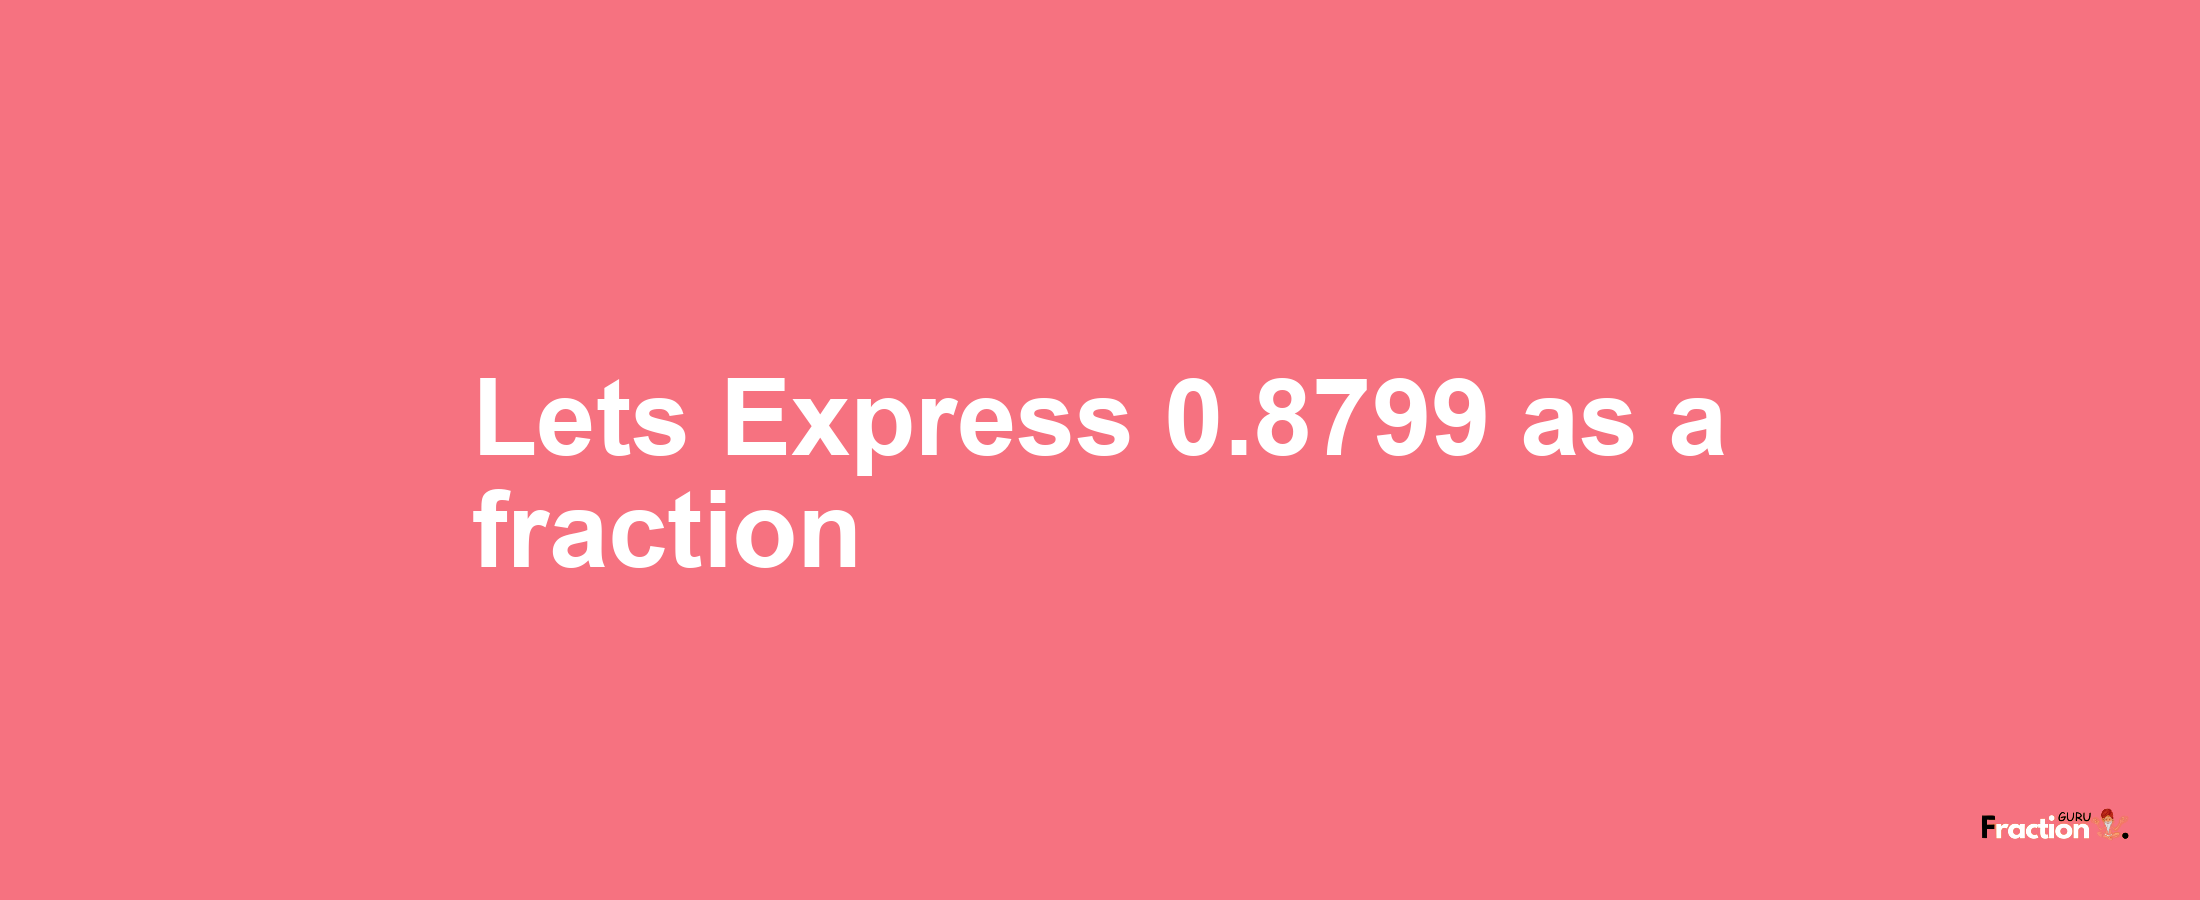 Lets Express 0.8799 as afraction